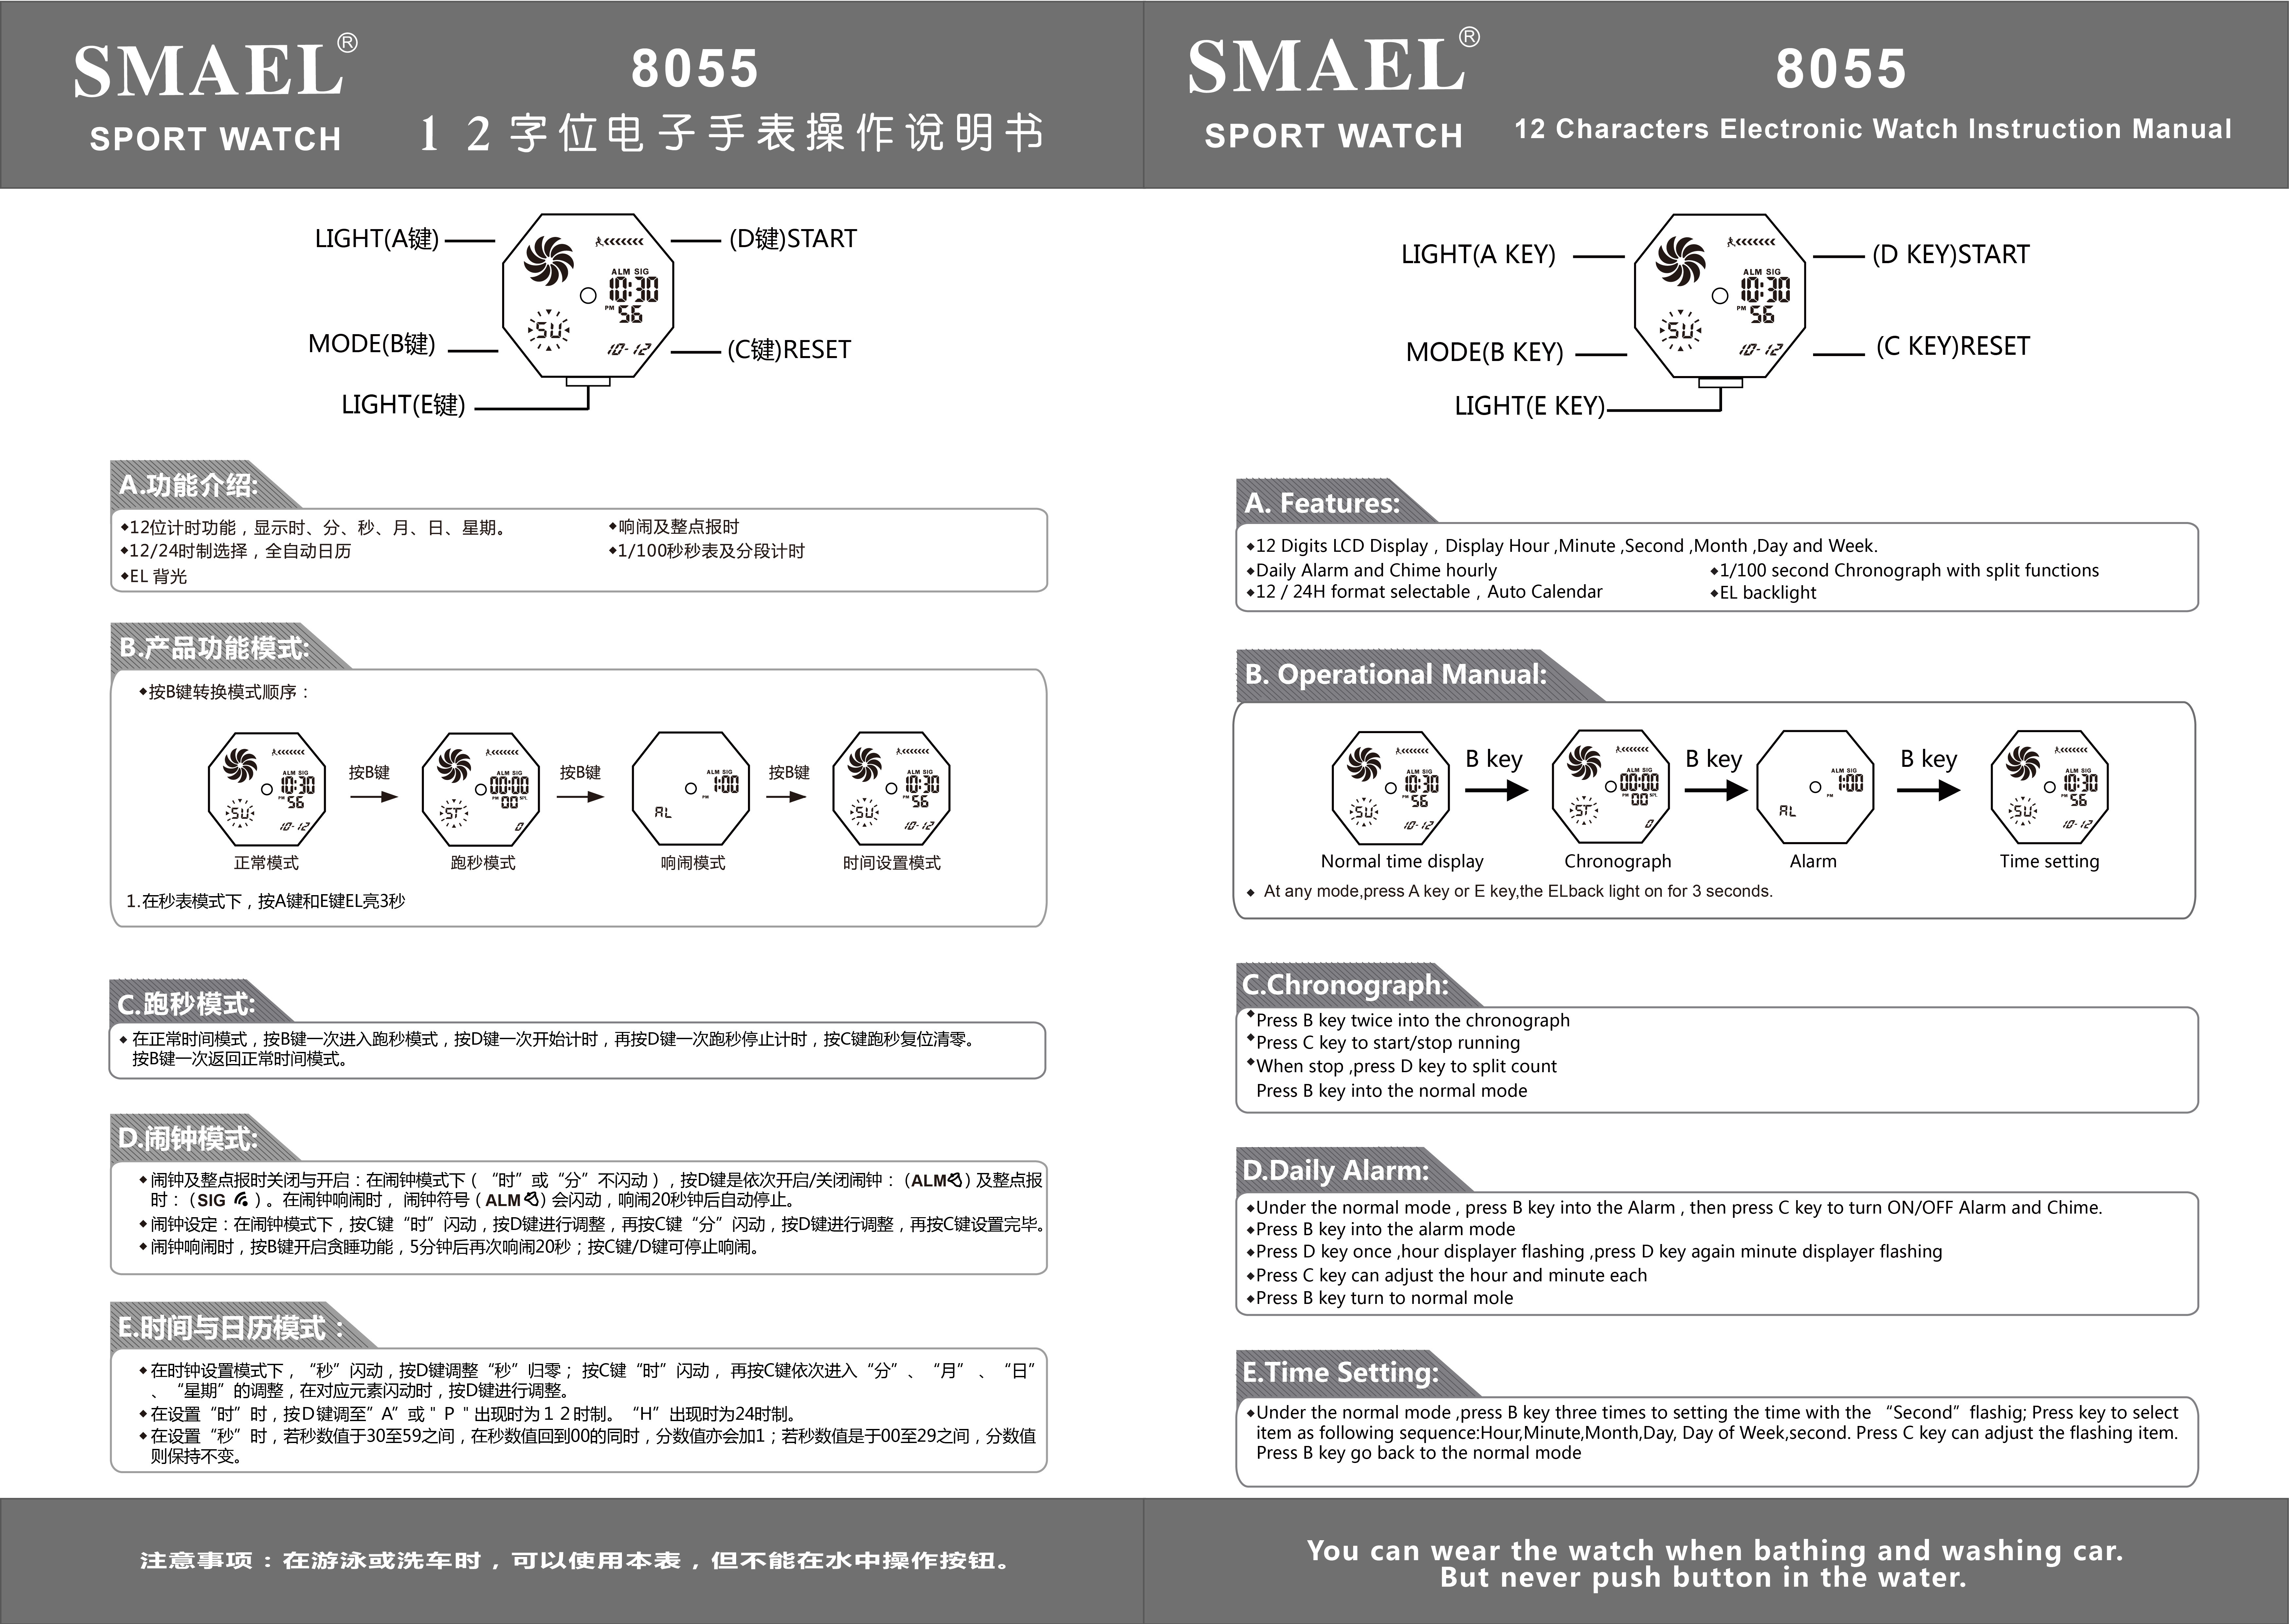 8055 instructions in English and Chinese 12